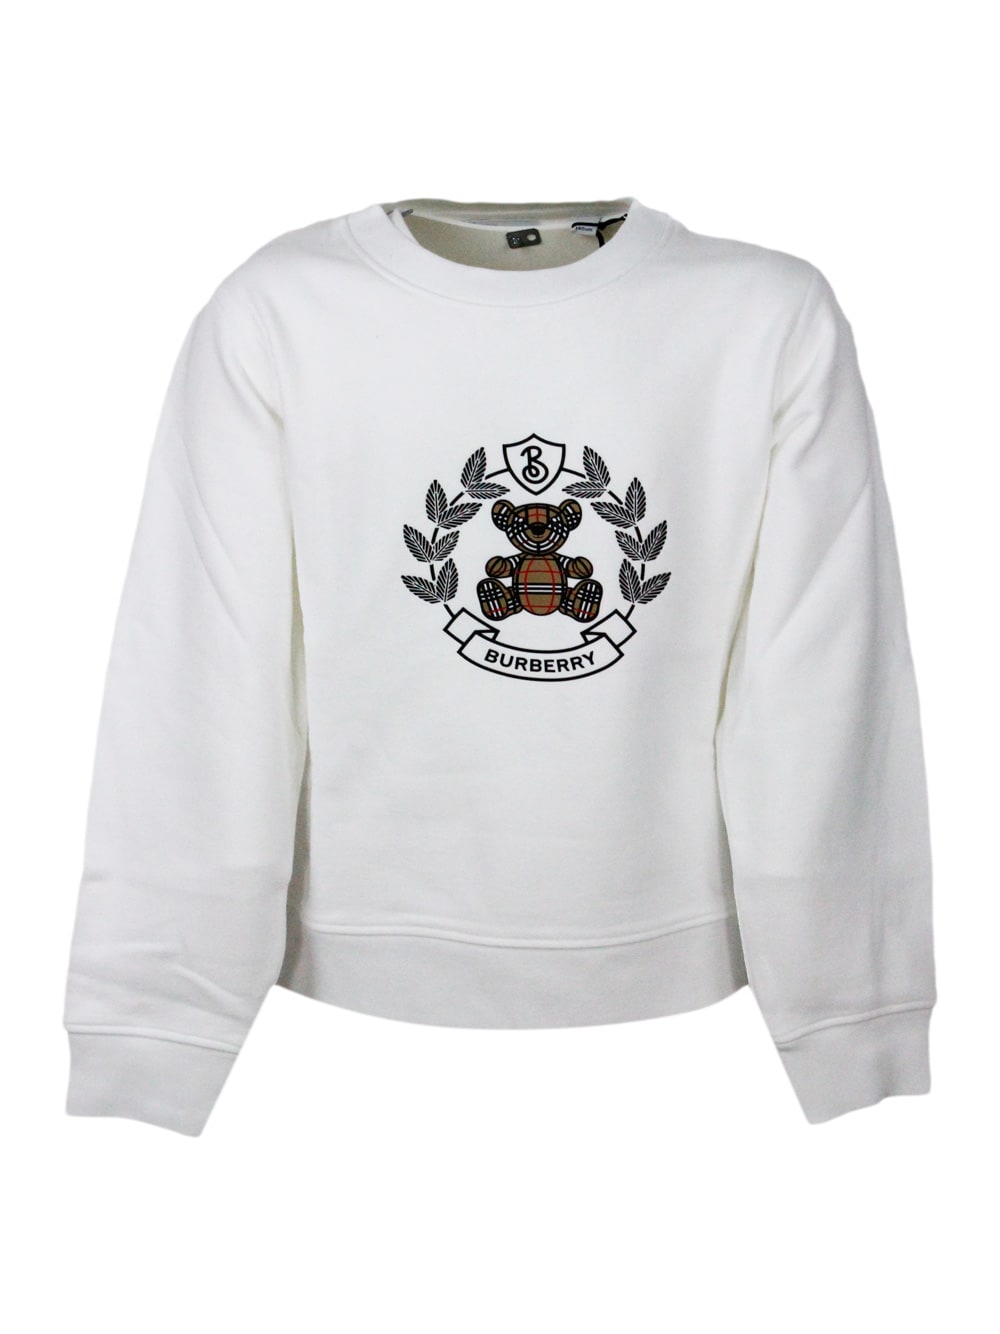 Shop Burberry Crewneck Sweatshirt In Cotton Jersey With Classic Check Teddy Bear Print On The Front In White